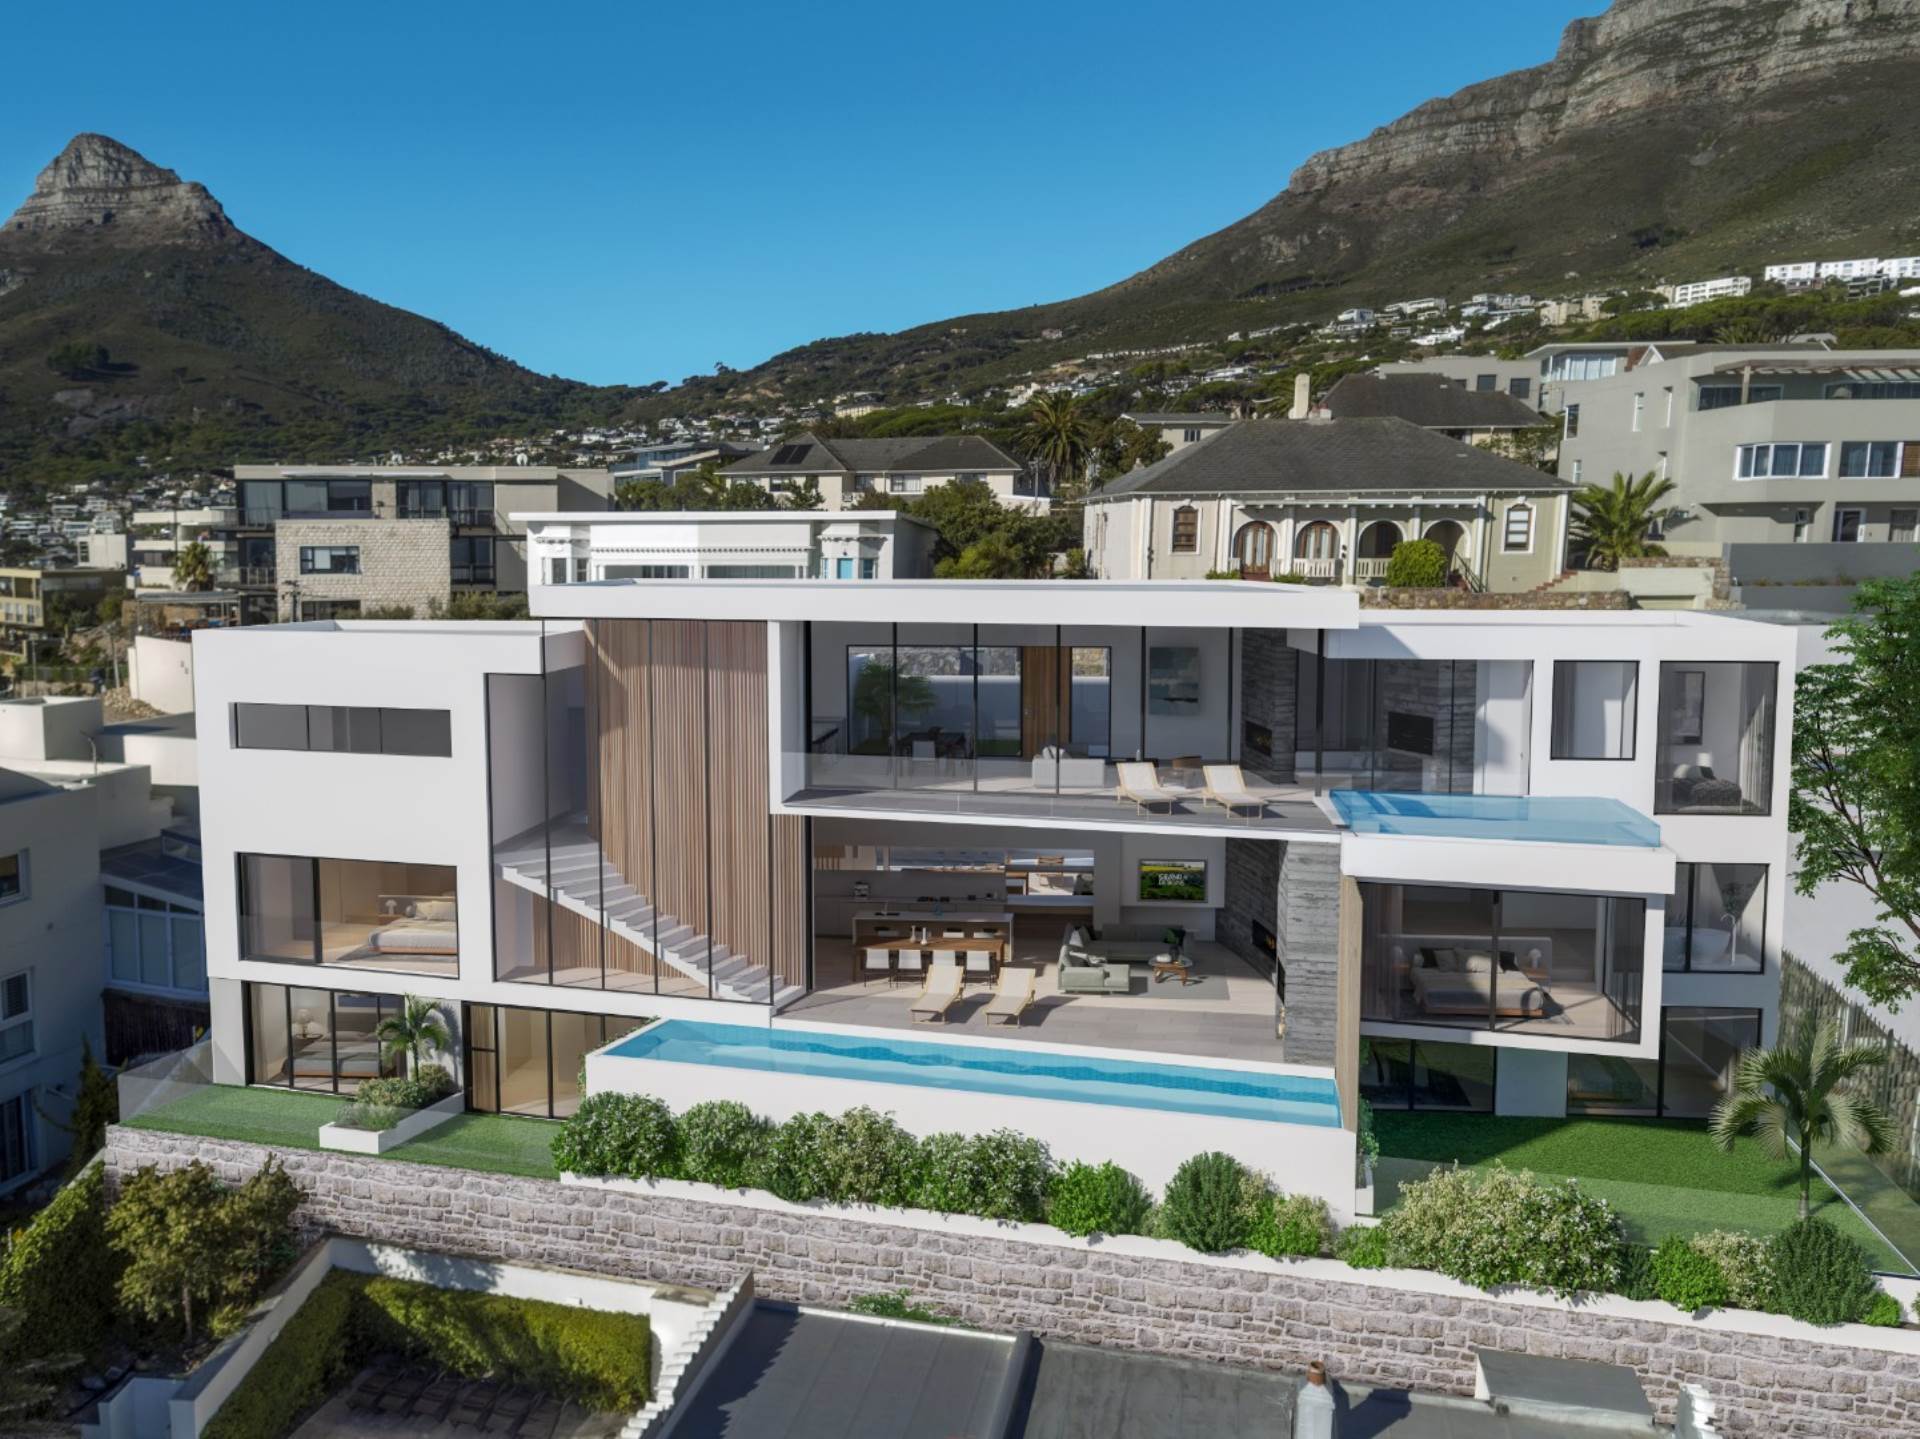 House For Sale In Camps Bay, Cape Town, Western Cape for R 39,995,000